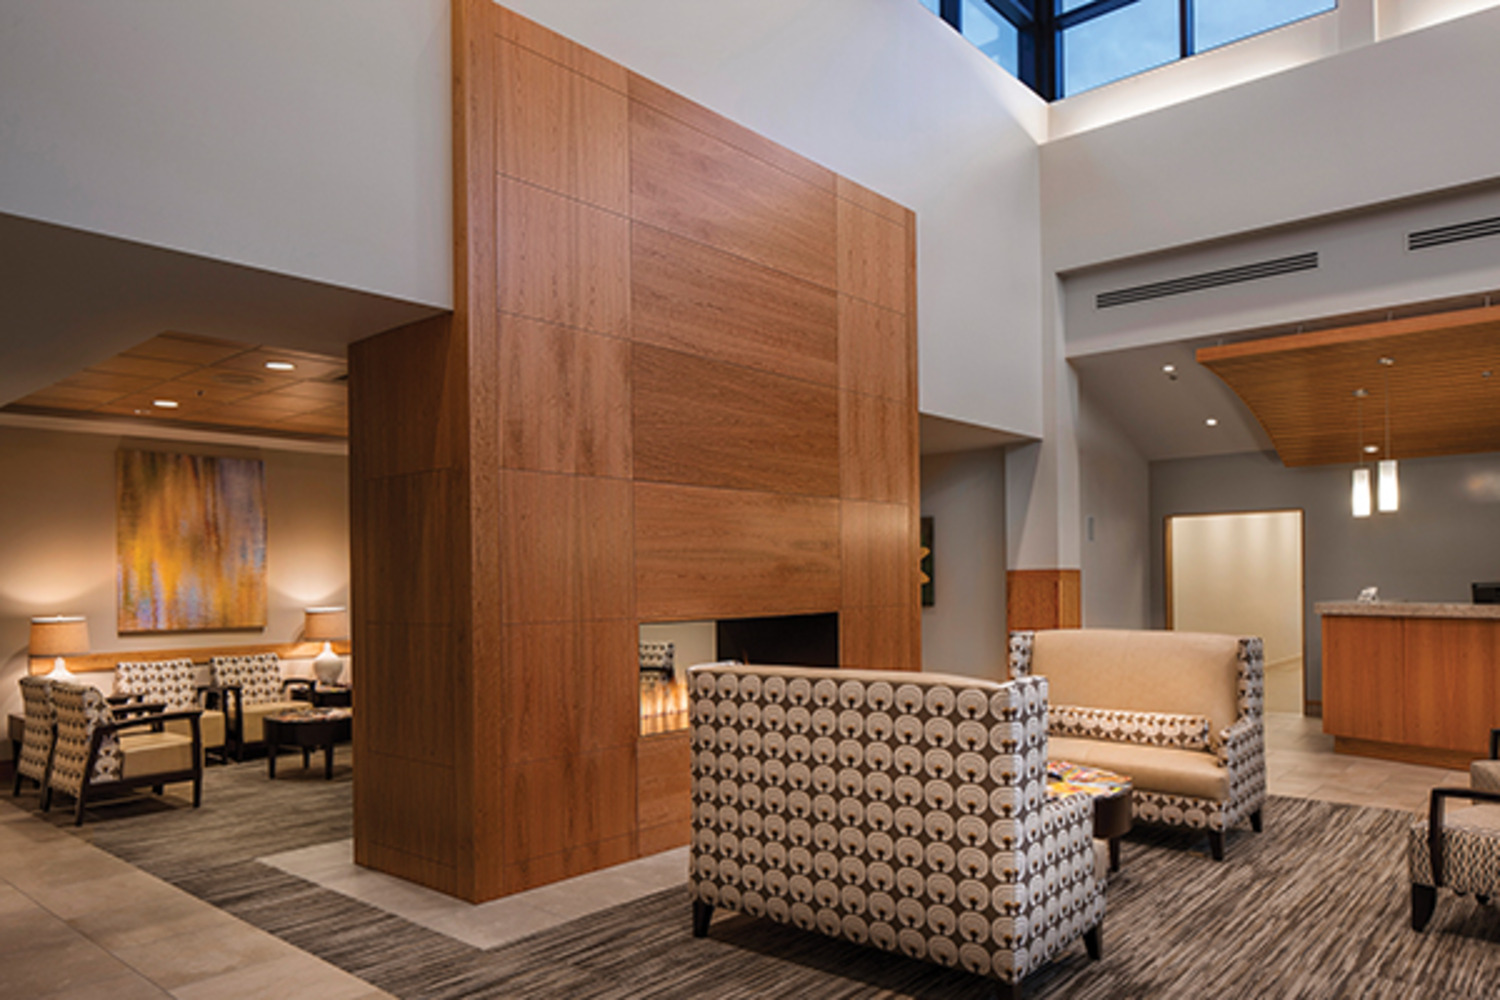 Patient comfort was the main design criterion for Missoula’s Community Cancer Care facility at the Community Medical Center. Photo: Mark Bryant